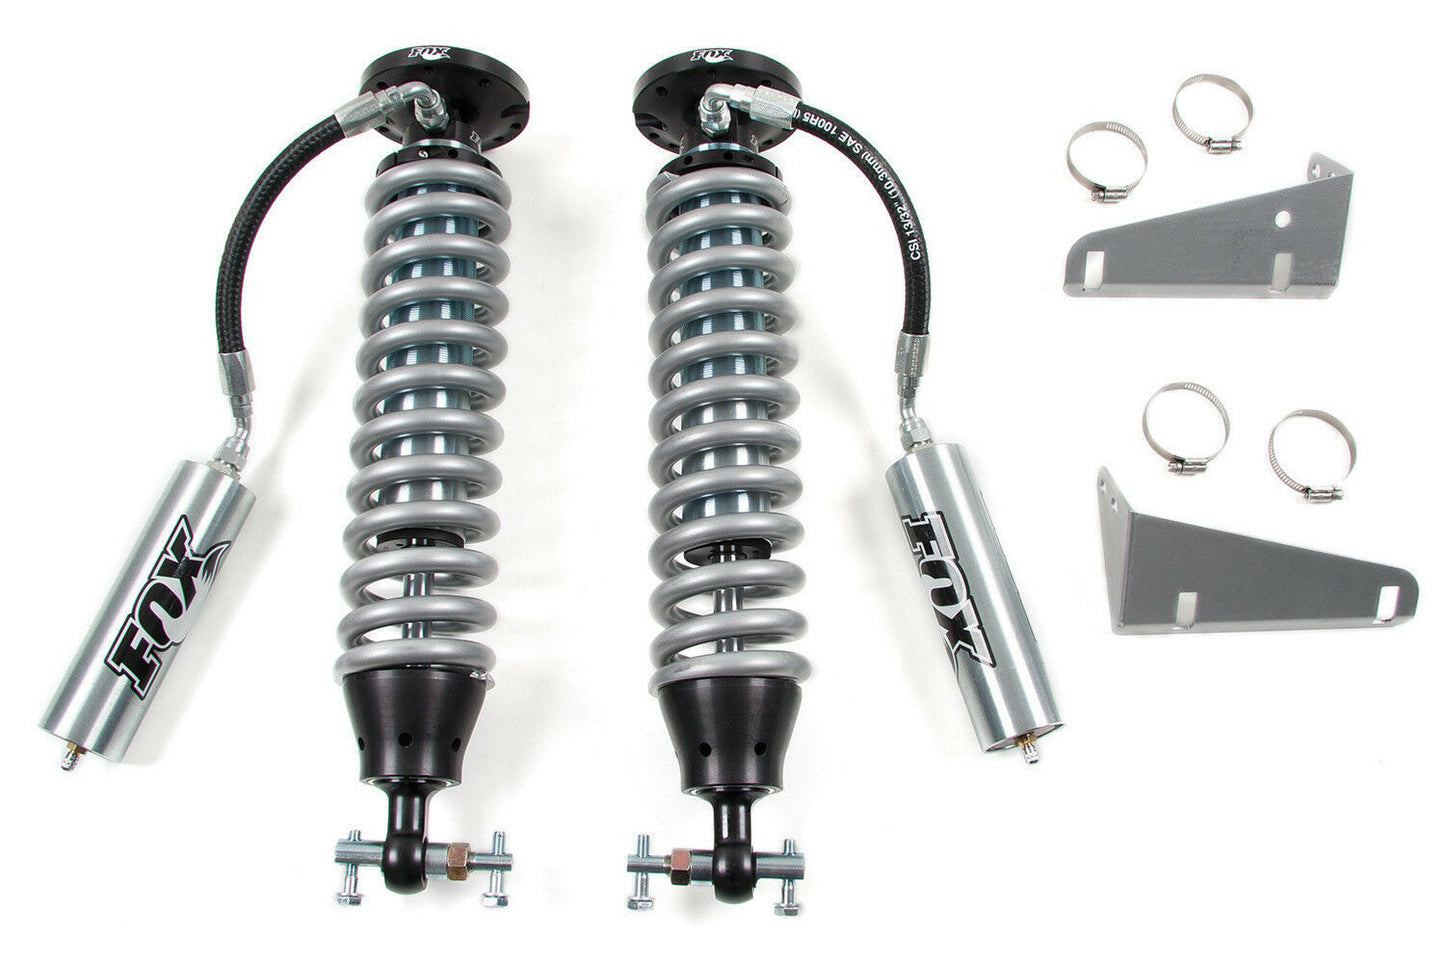 Chevy 1500 BDS Fox 2.5 Remote Reservoir Coil-Overs for 6" Suspension Lifts 07-17